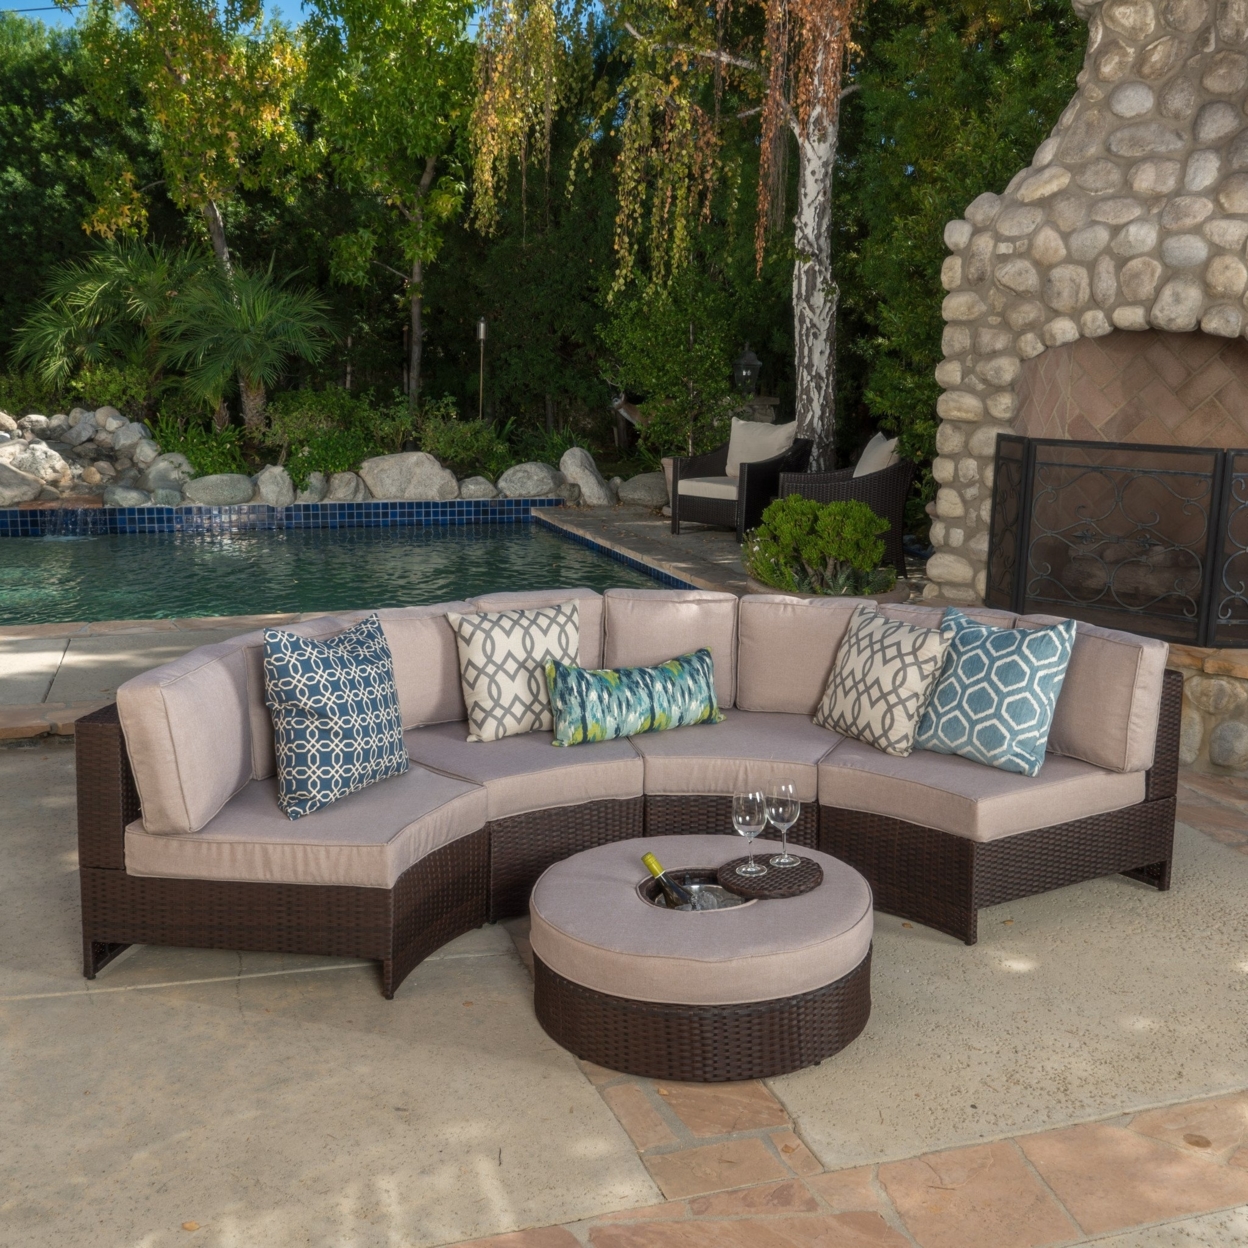 Riviera 5pc Outdoor Sectional Sofa Set With Ice Bucket Ottoman - Beige